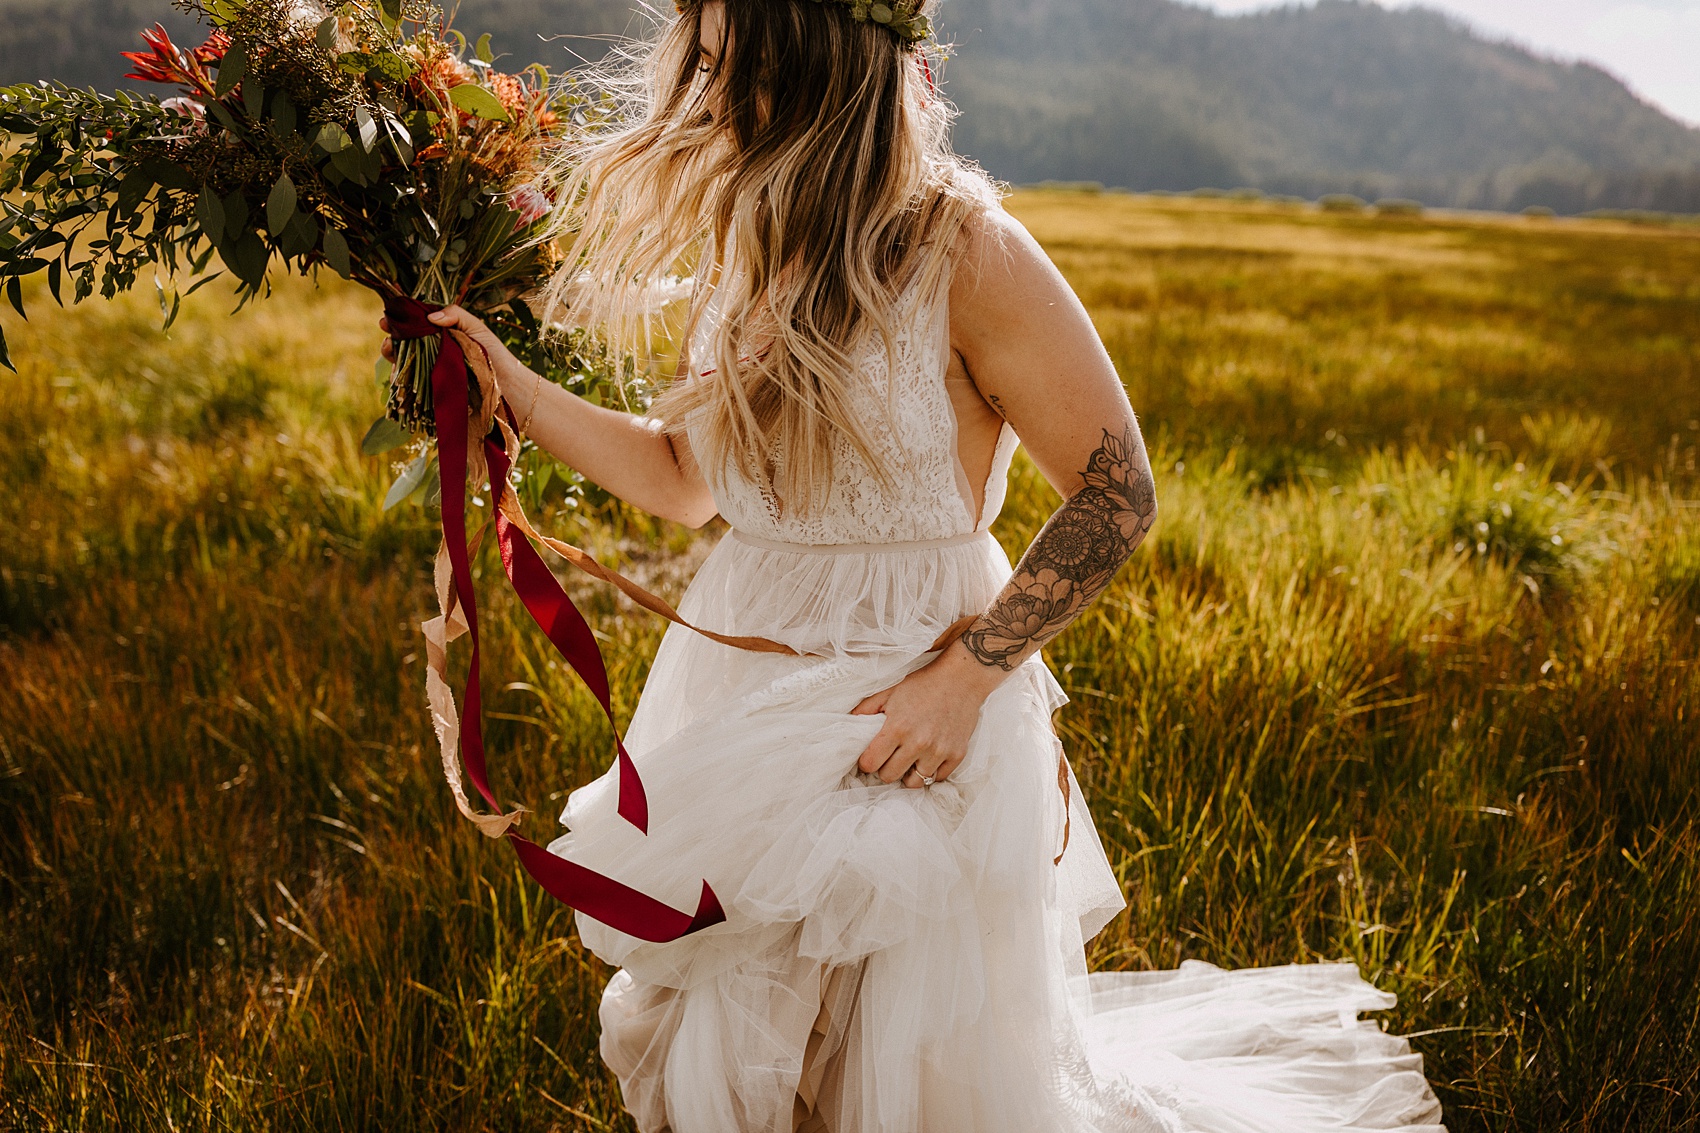 mountain meadow elopement bend oregon sparks lake cascade lakes highway victoria carlson woodland floral